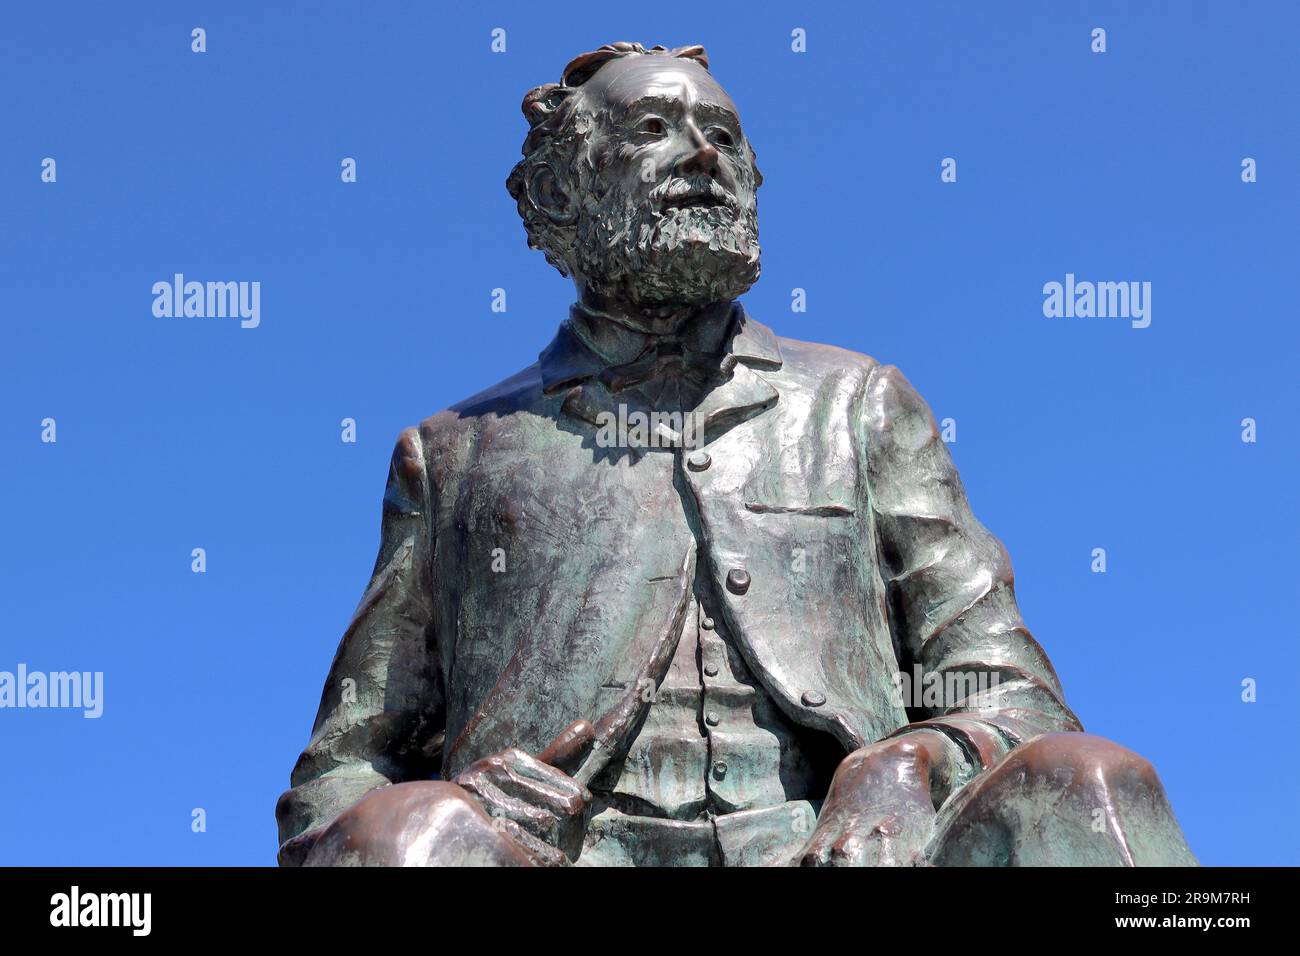 Head and shoulders of the bronze scuipture of Jules Verne sitting on an octopus by local sculptor José Morales, Montero Ríos gardens, Vigo, Spain. Stock Photo